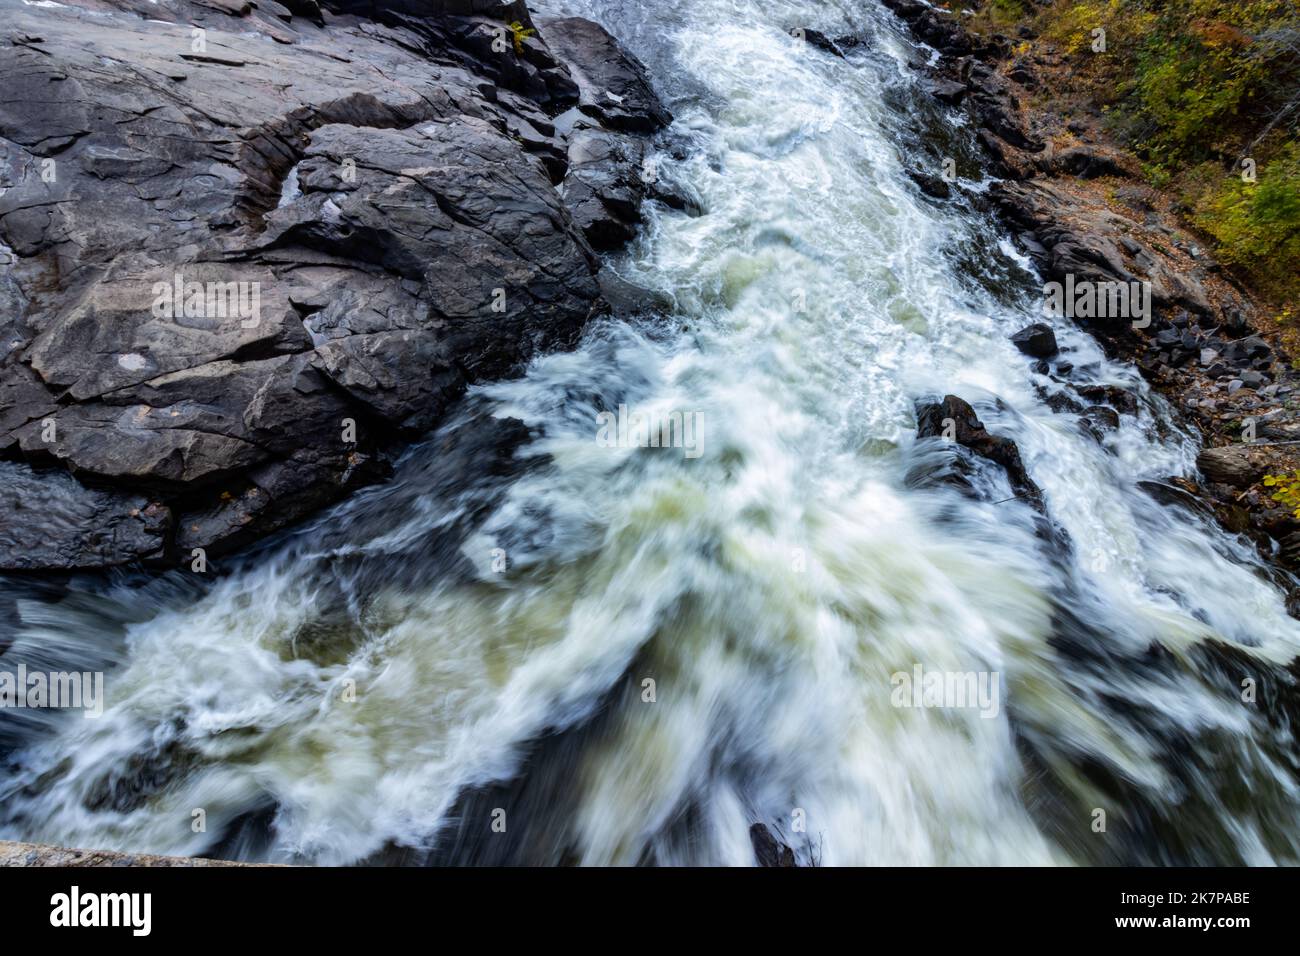 A view down the river of the  turbulent flow of water over bedrock; an action shot. Stock Photo